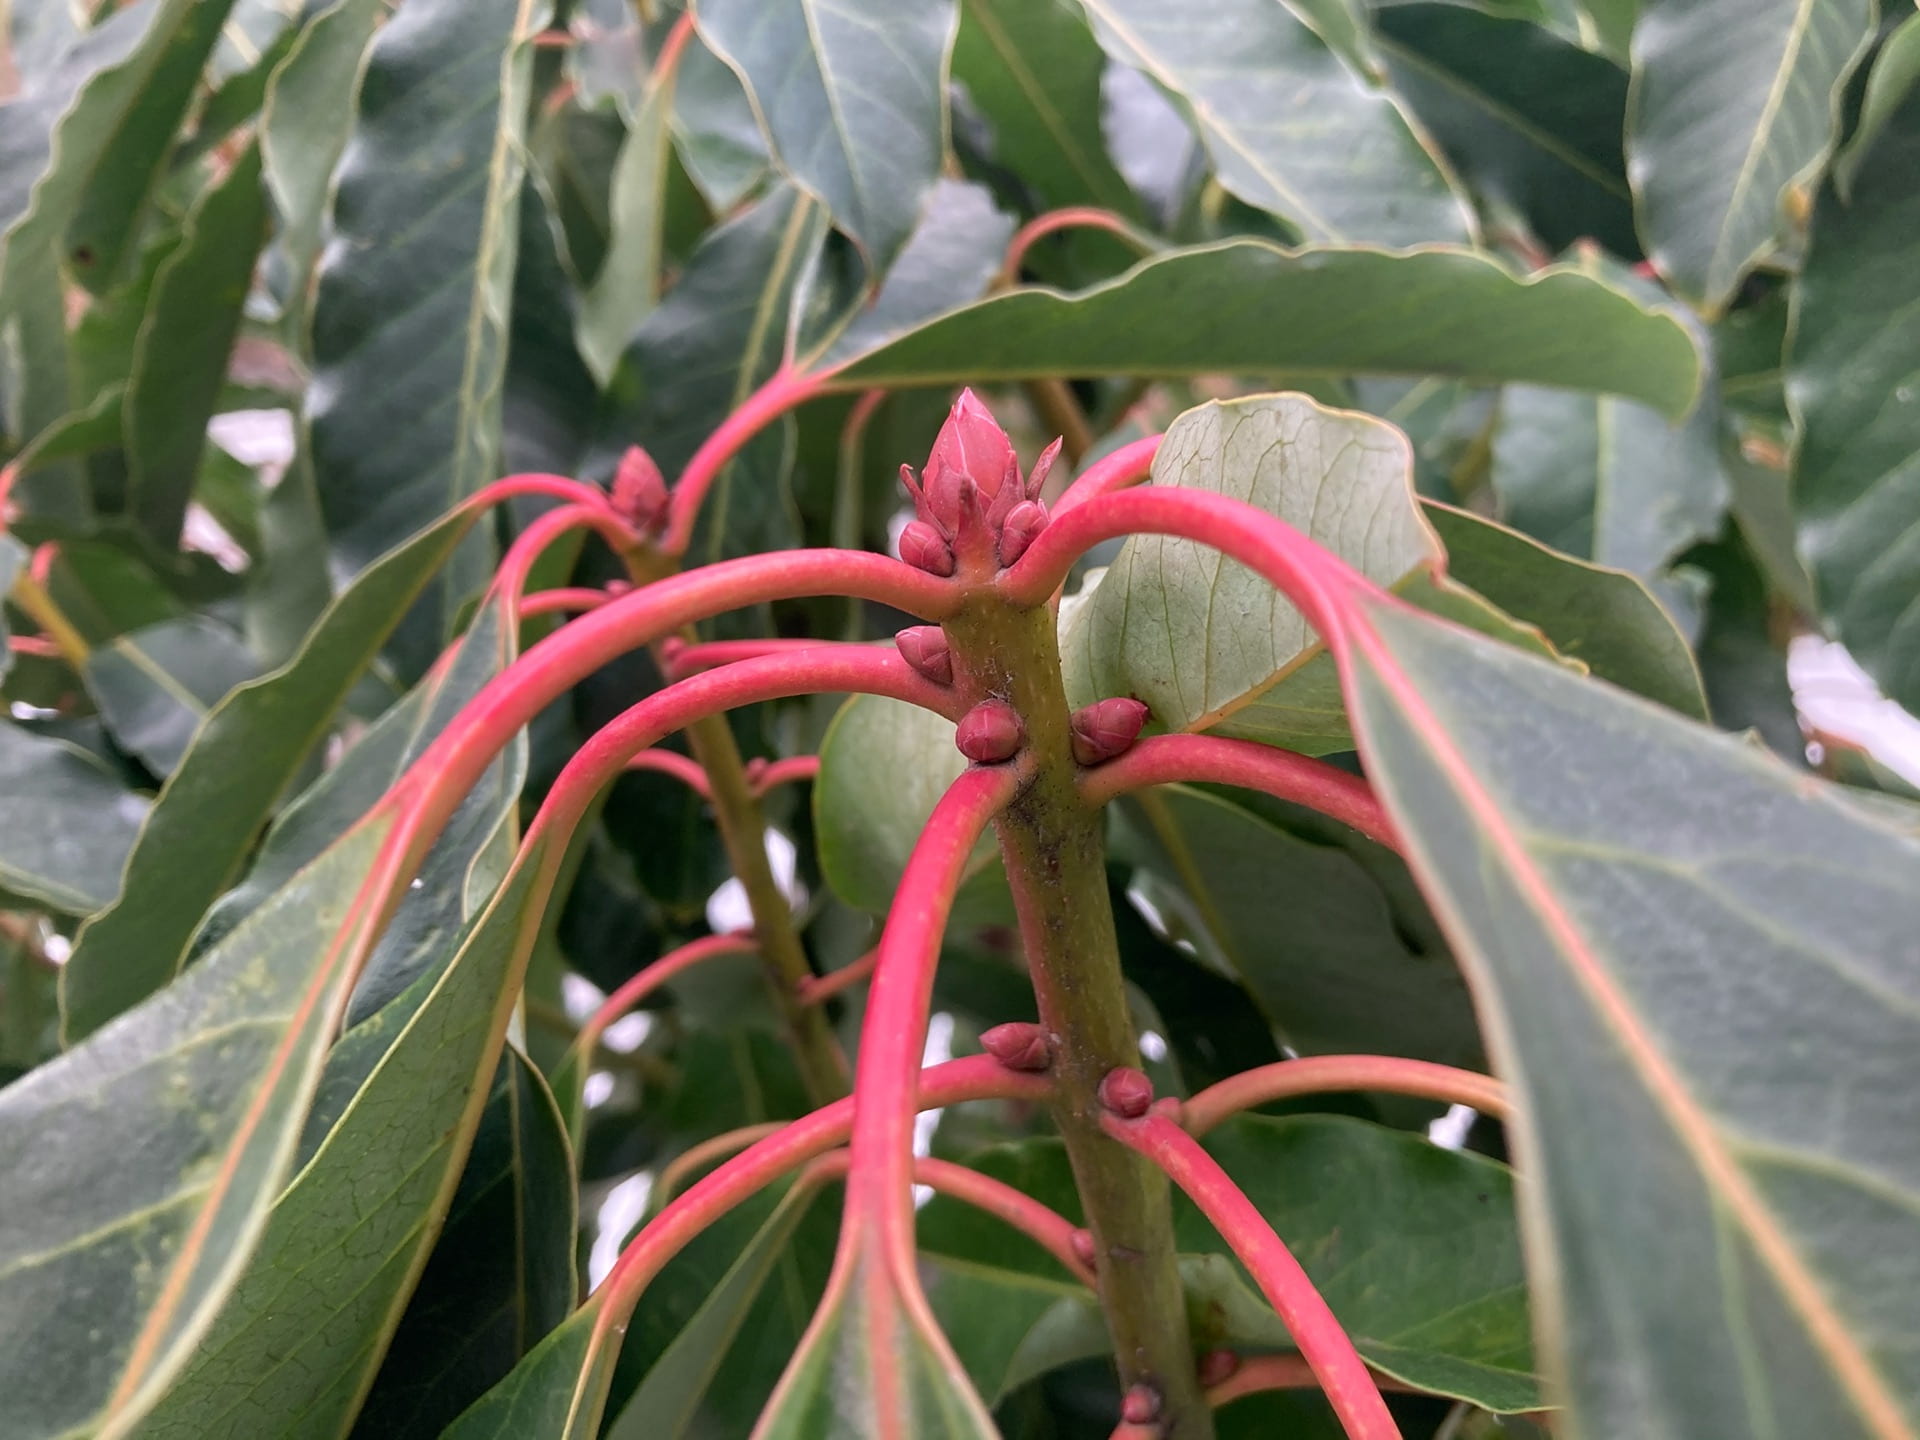 The vibrant red petioles of Daphniphyllum macropodum contrast with its glossy green evergreen leaves.